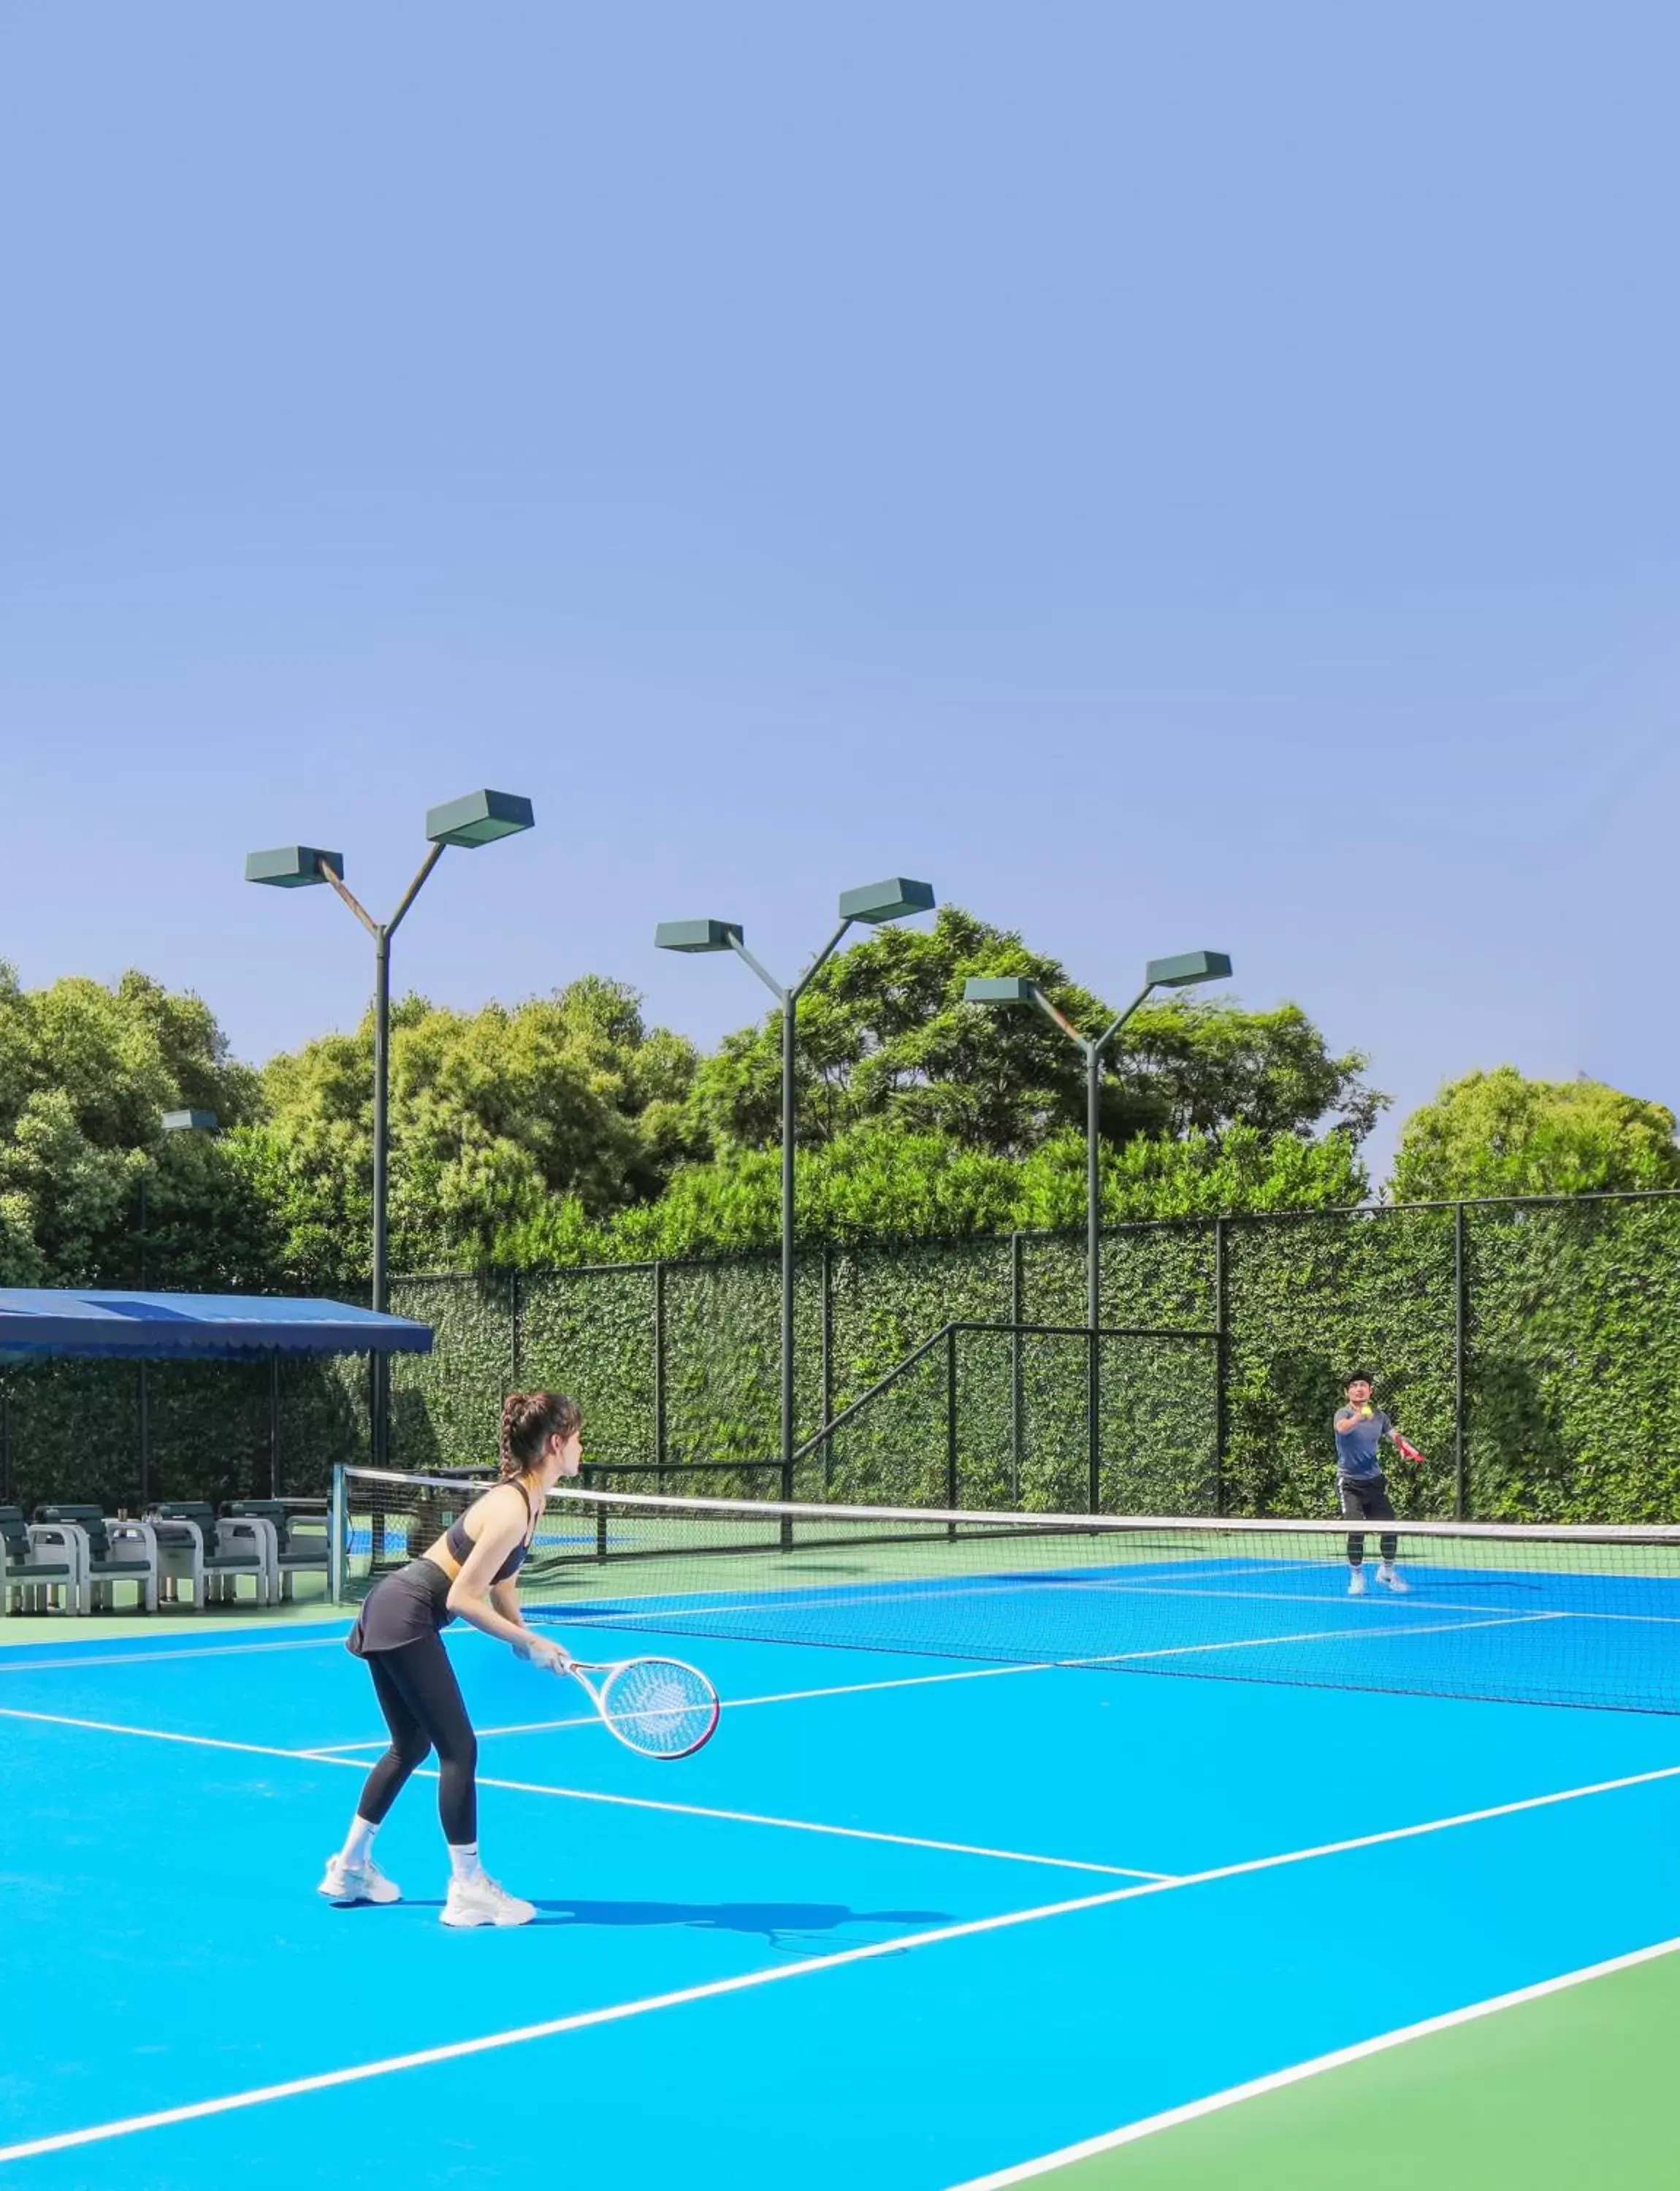 Tennis court, Other Activities in Pan Pacific Serviced Suites Ningbo